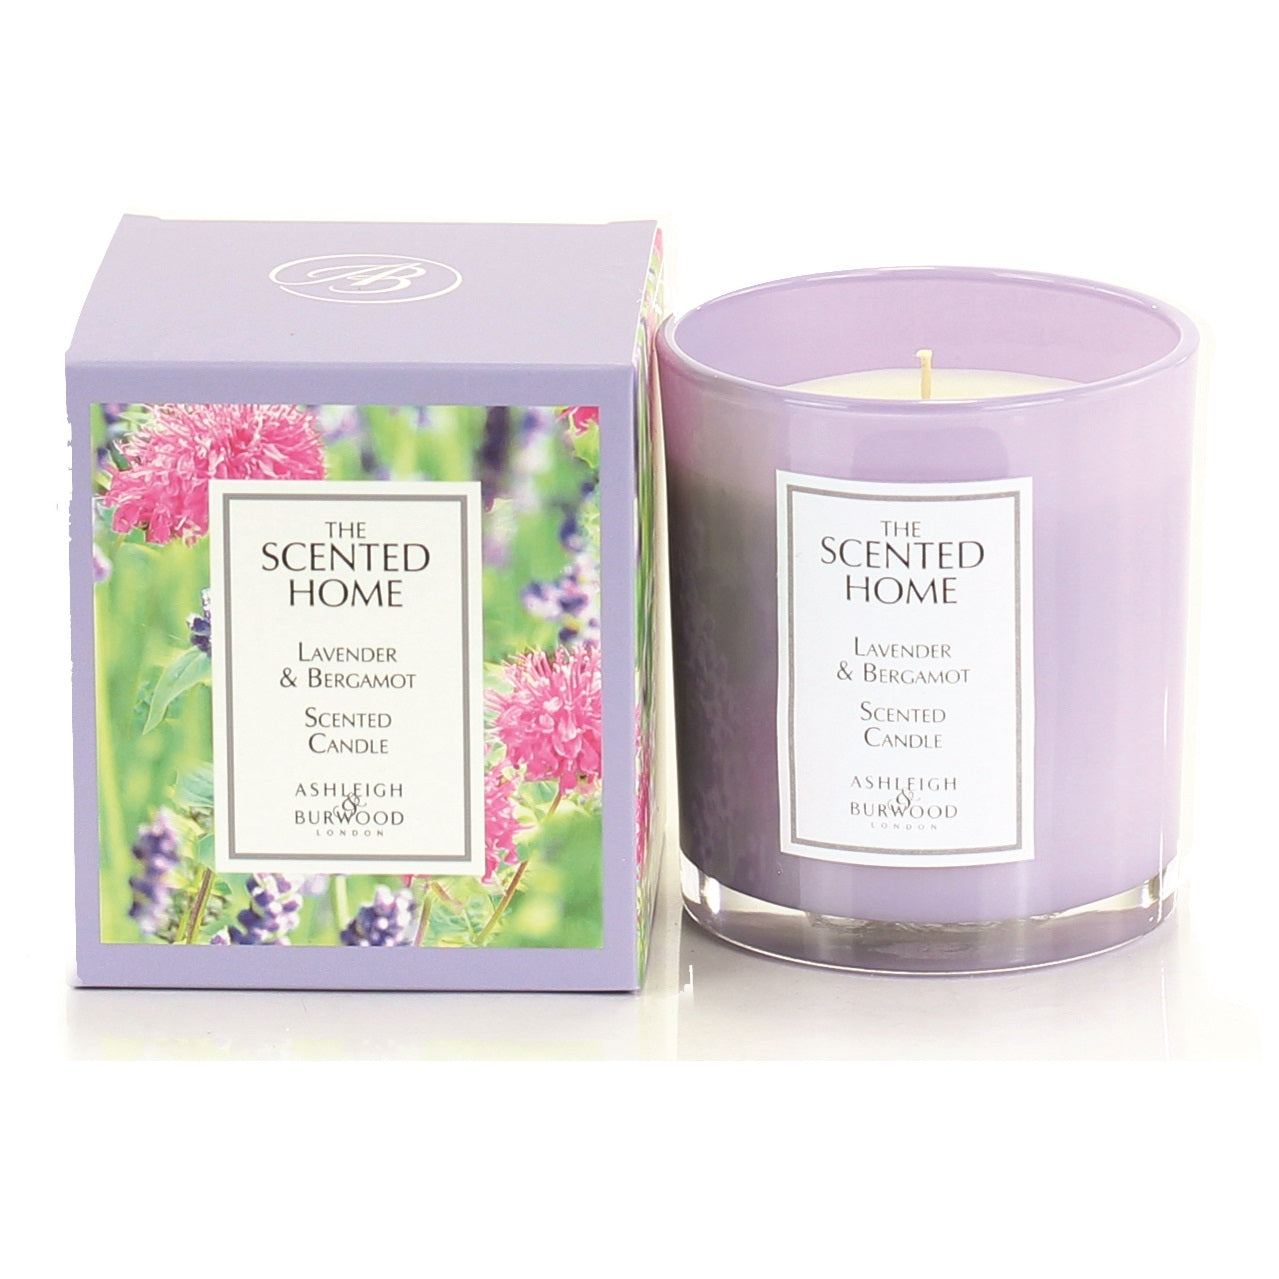 BOXED GLASS CANDLE 225G LAVENDER & BERGAMOT - SCENTED HOME